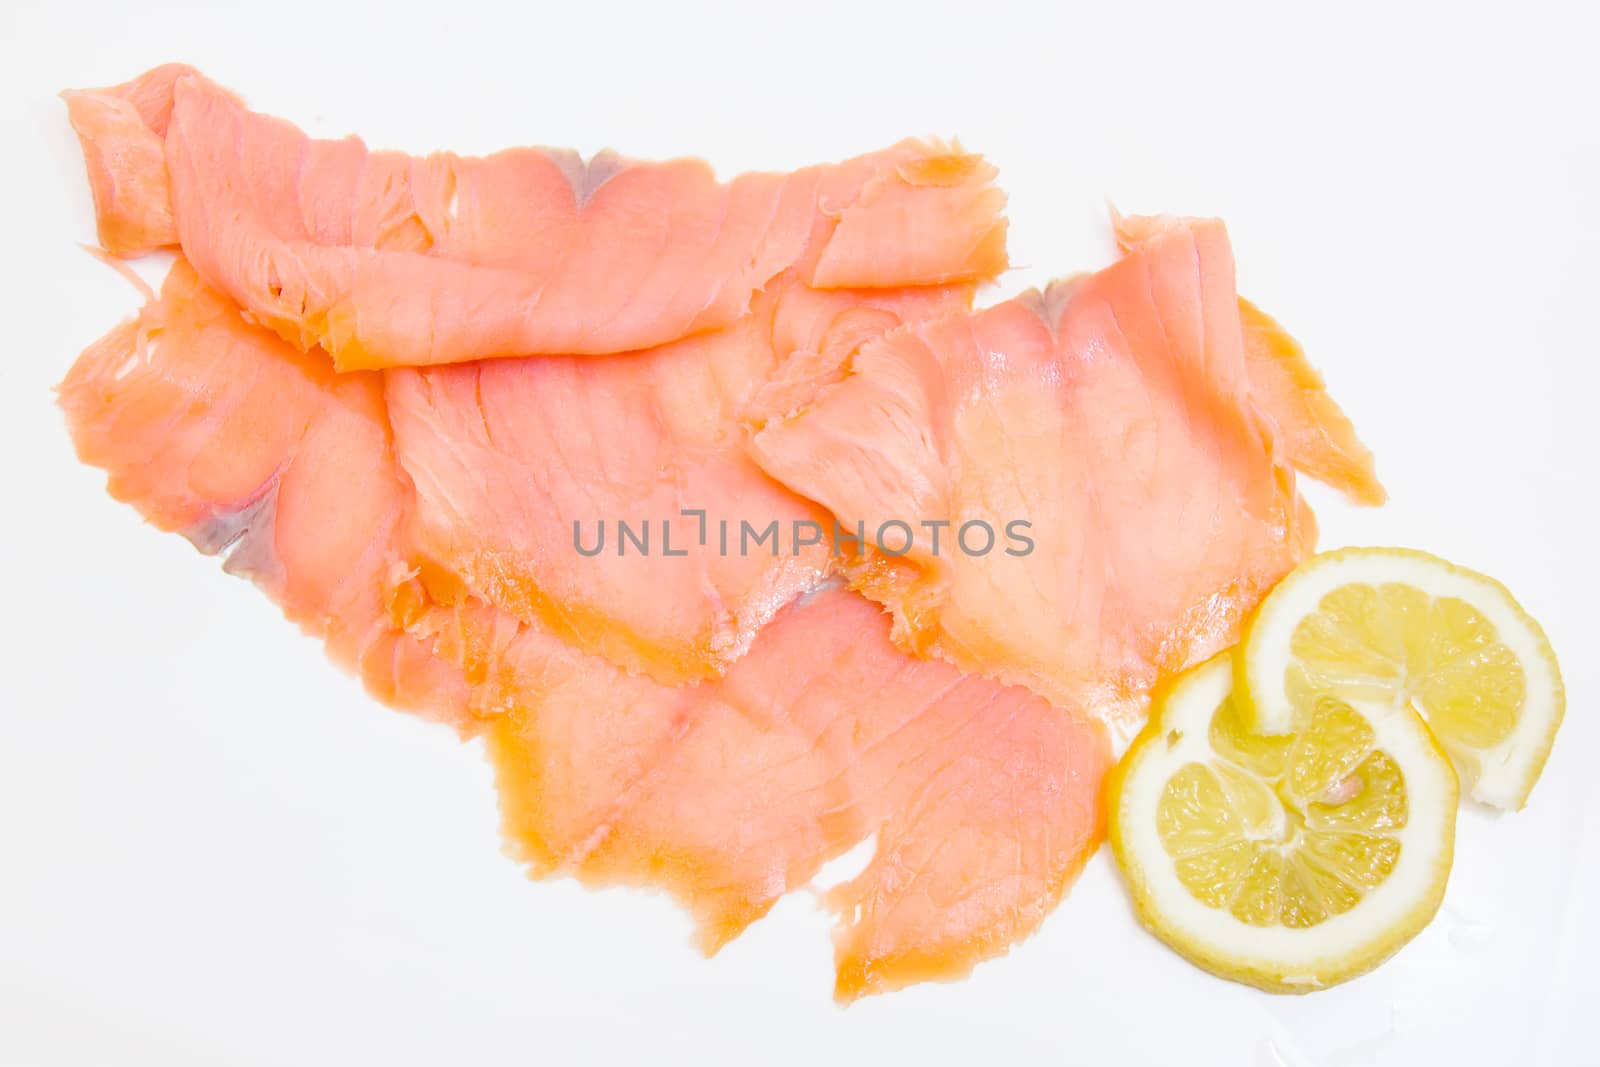 Smoked salmon by spafra